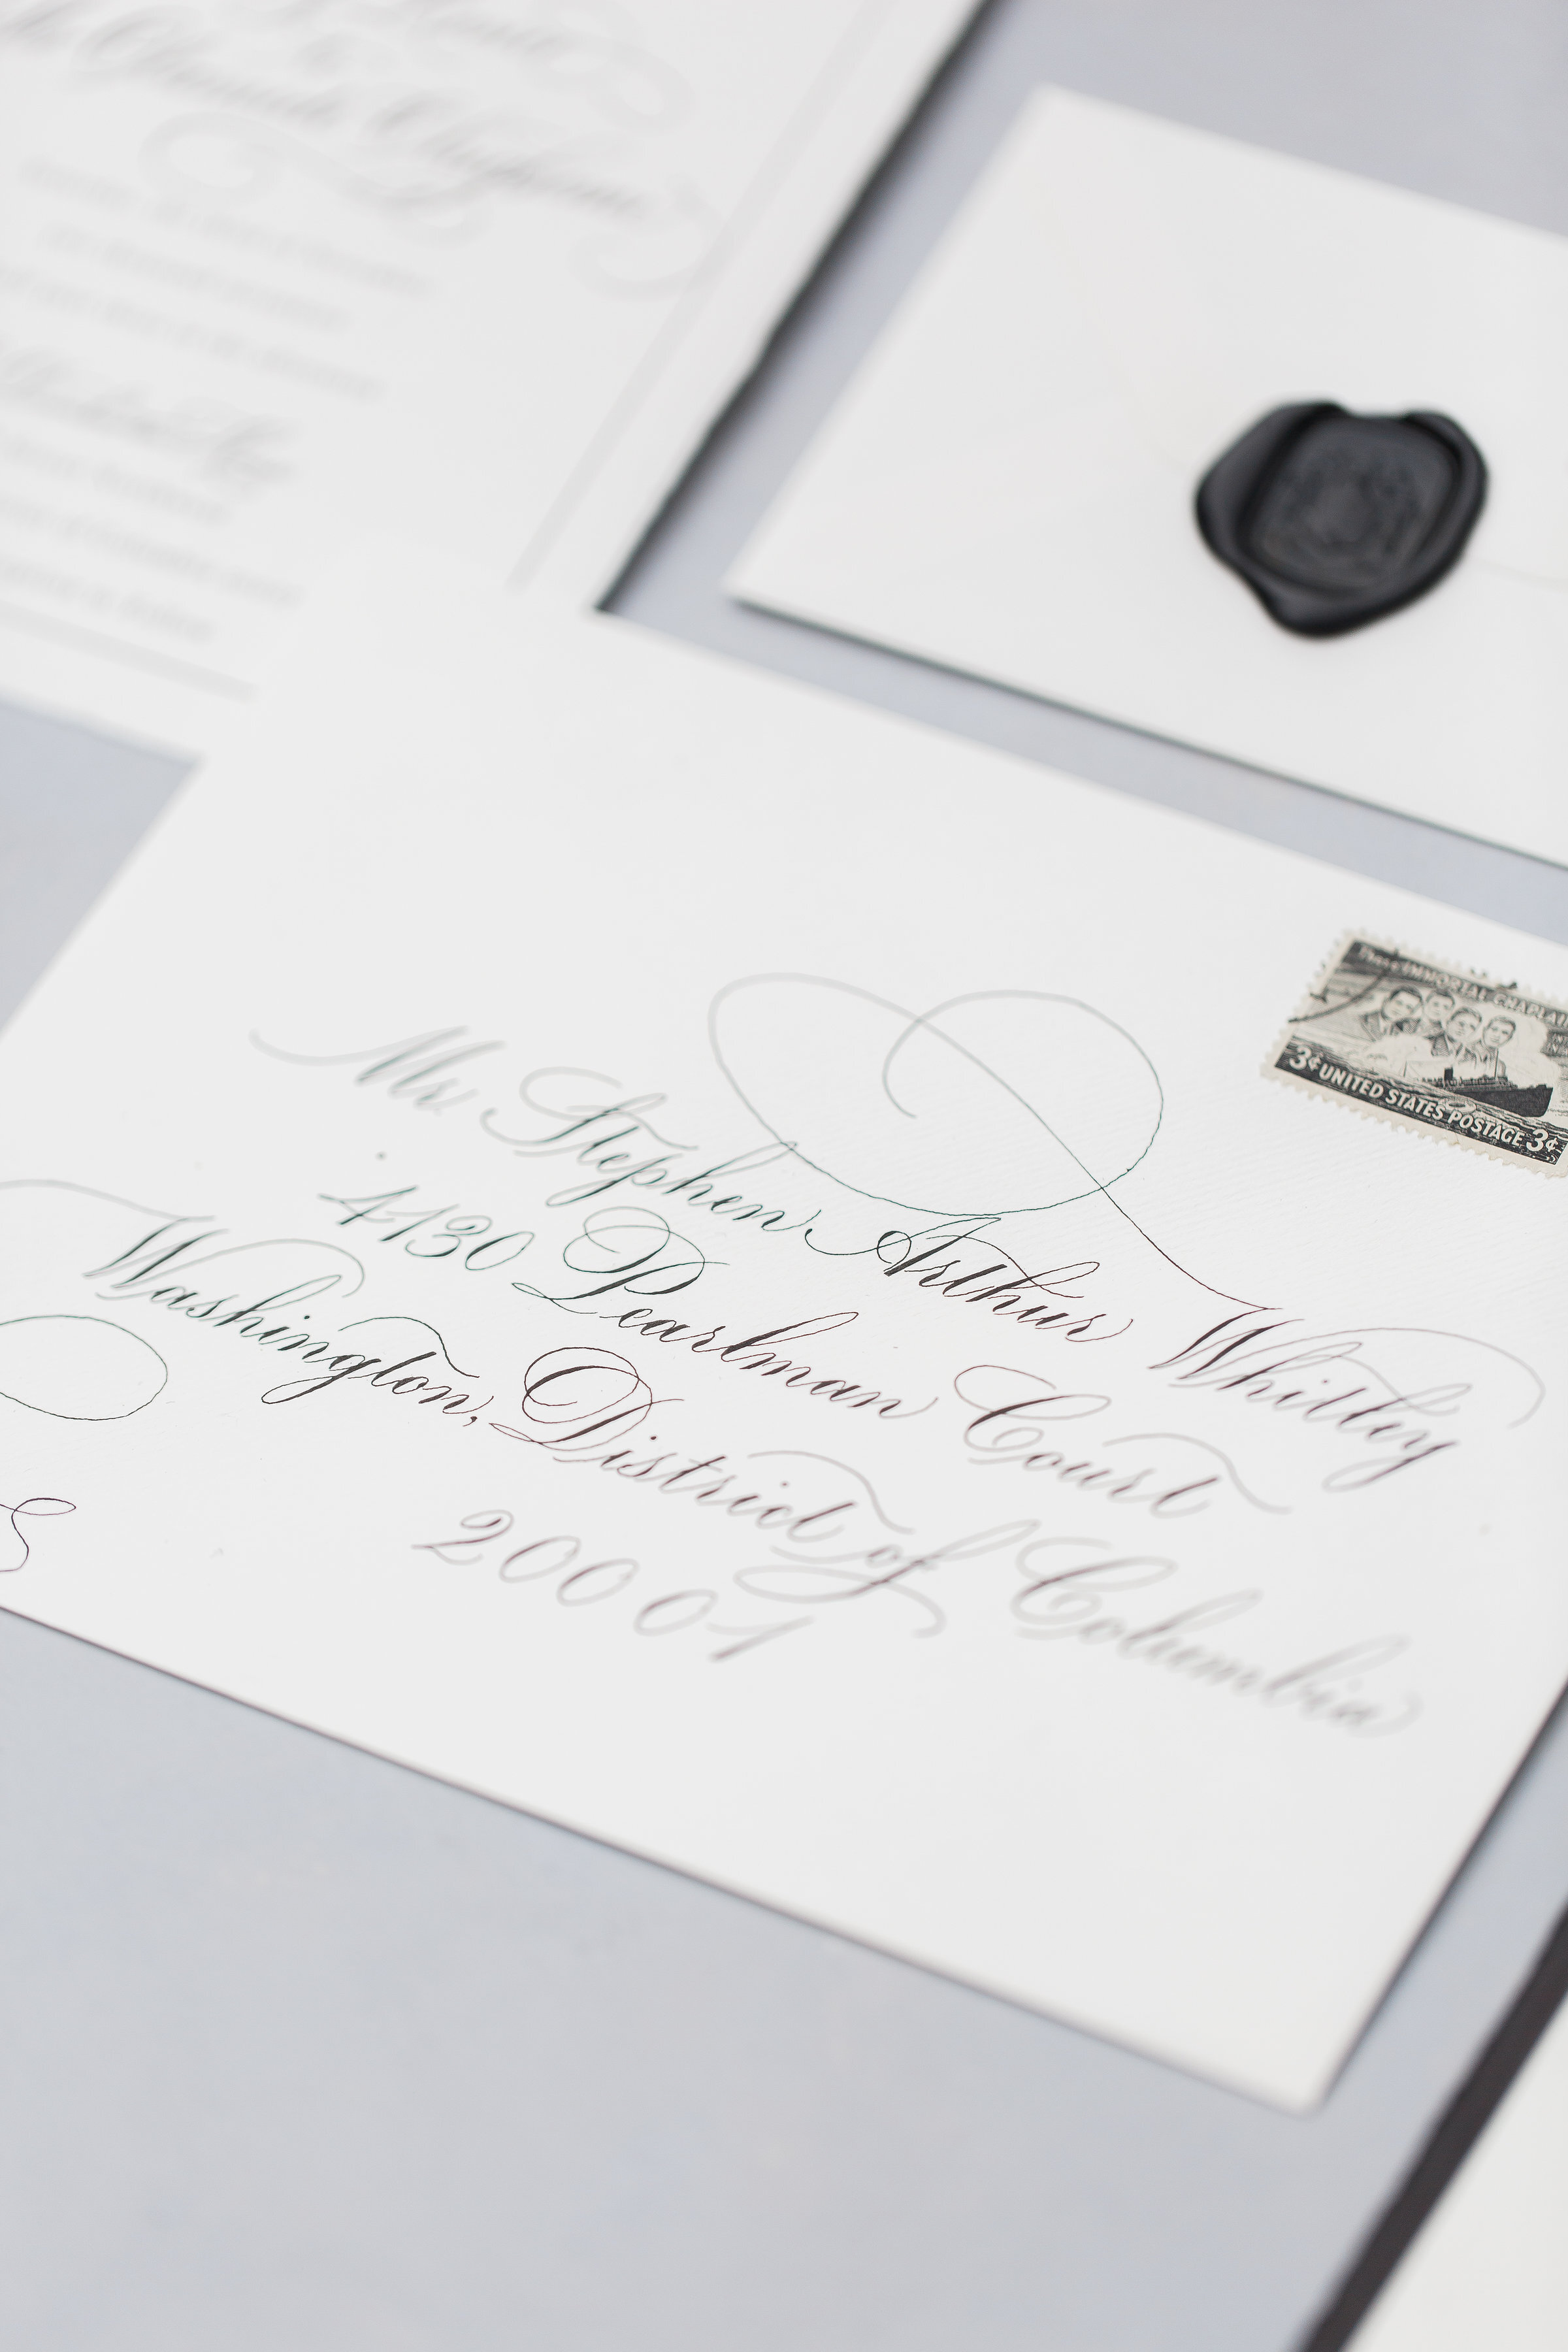 pacific-engagements-dumbarton-house-wedding-invitations-black-and-white-calligraphy